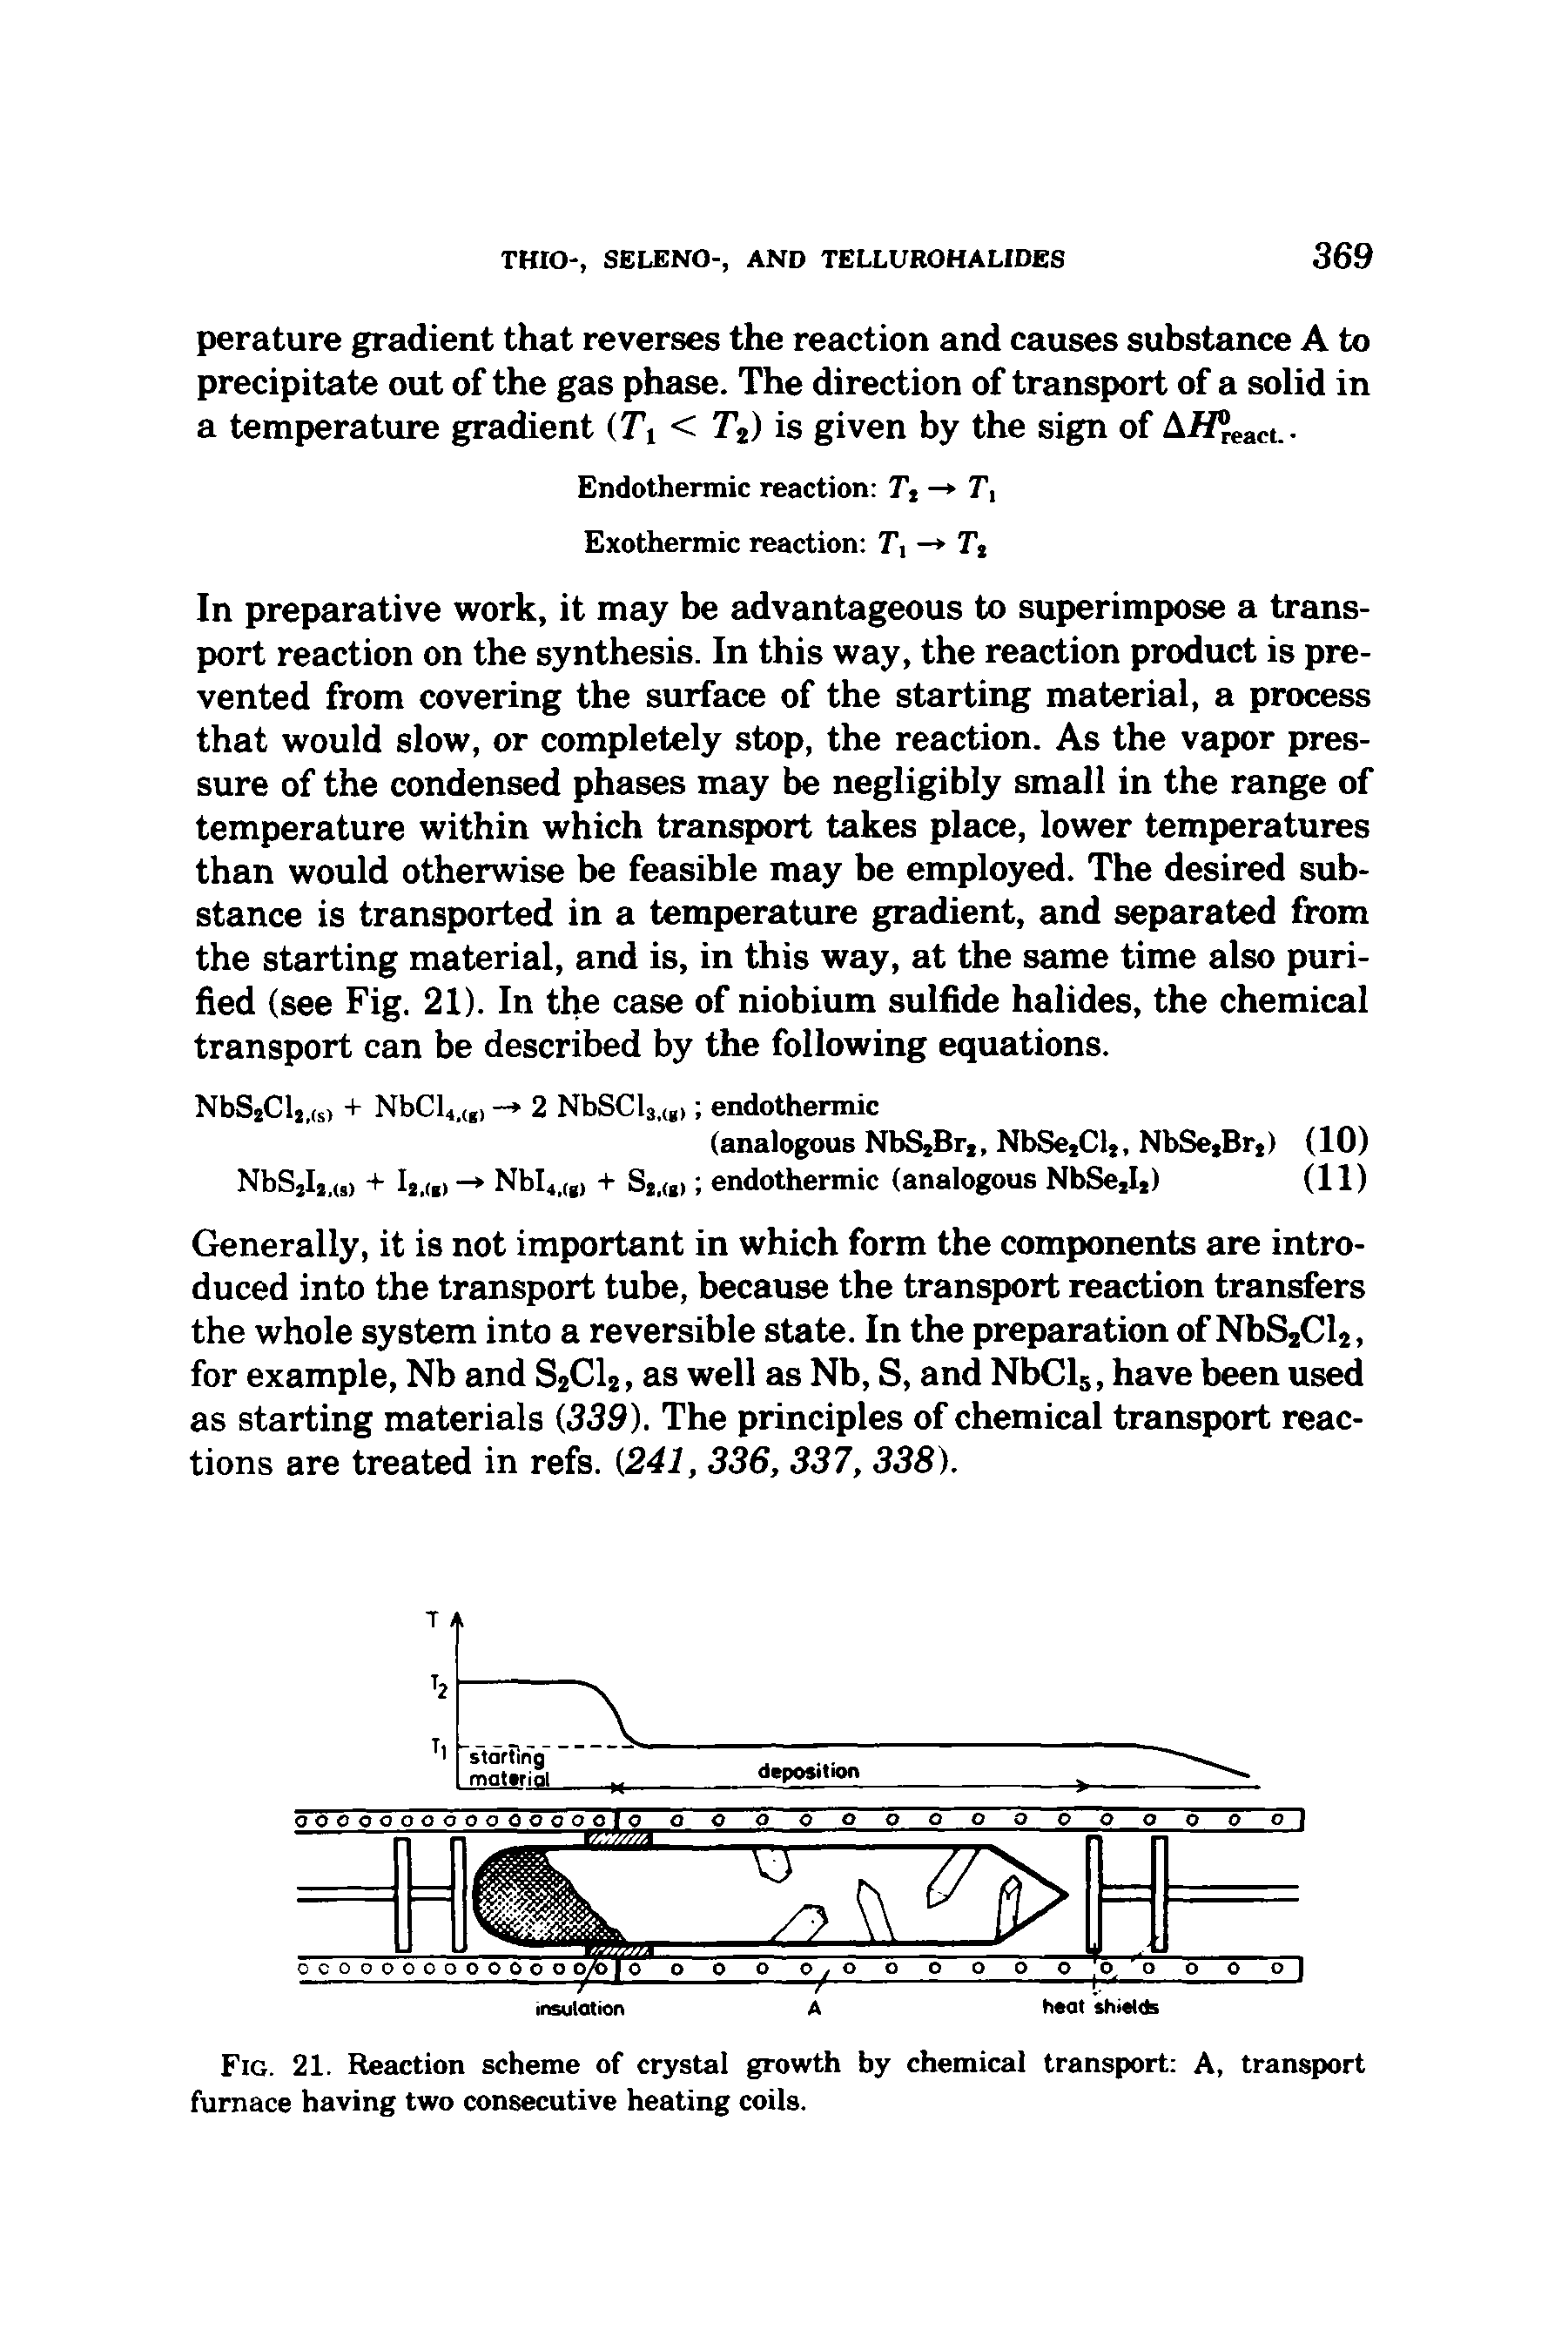 Fig. 21. Reaction scheme of crystal growth by chemical transport A, transport furnace having two consecutive heating coils.